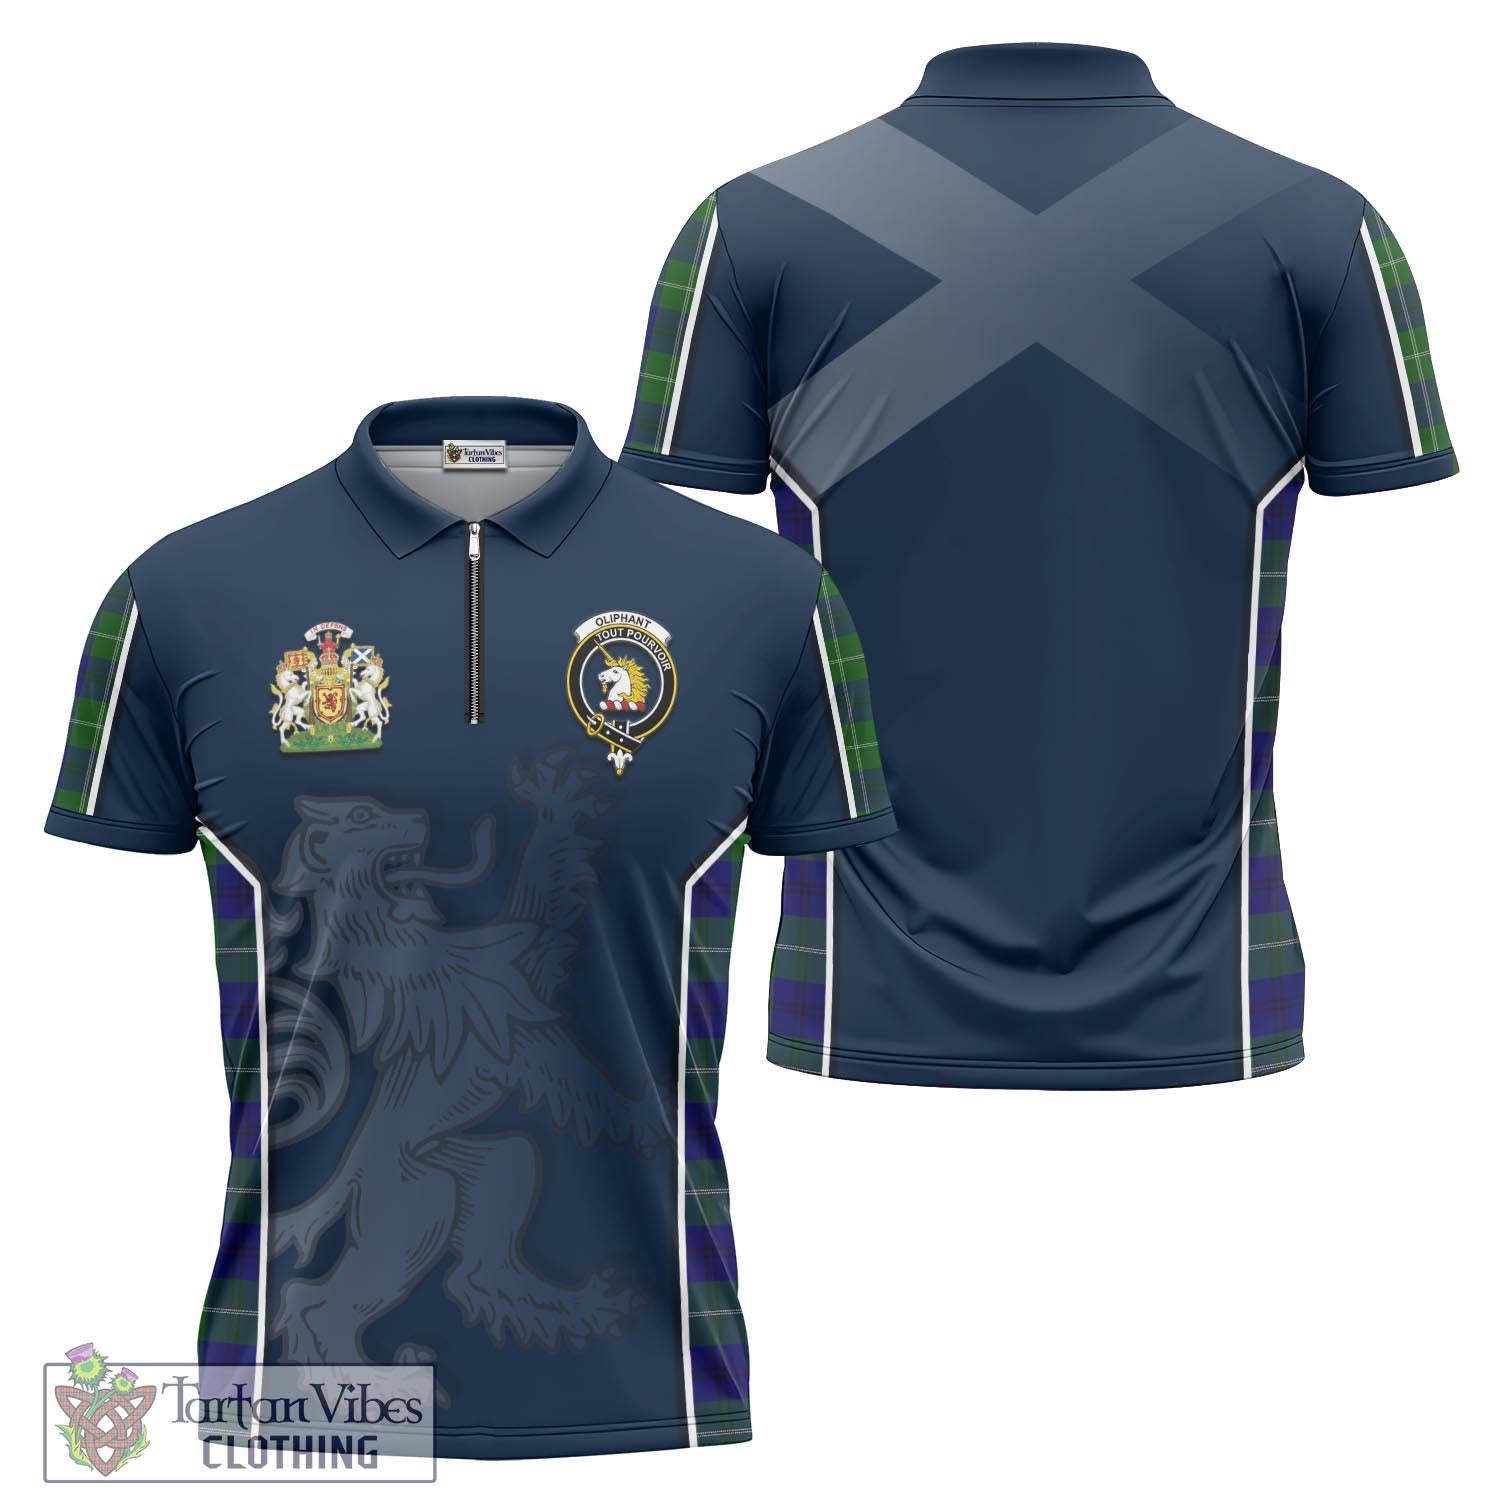 Tartan Vibes Clothing Oliphant Modern Tartan Zipper Polo Shirt with Family Crest and Lion Rampant Vibes Sport Style